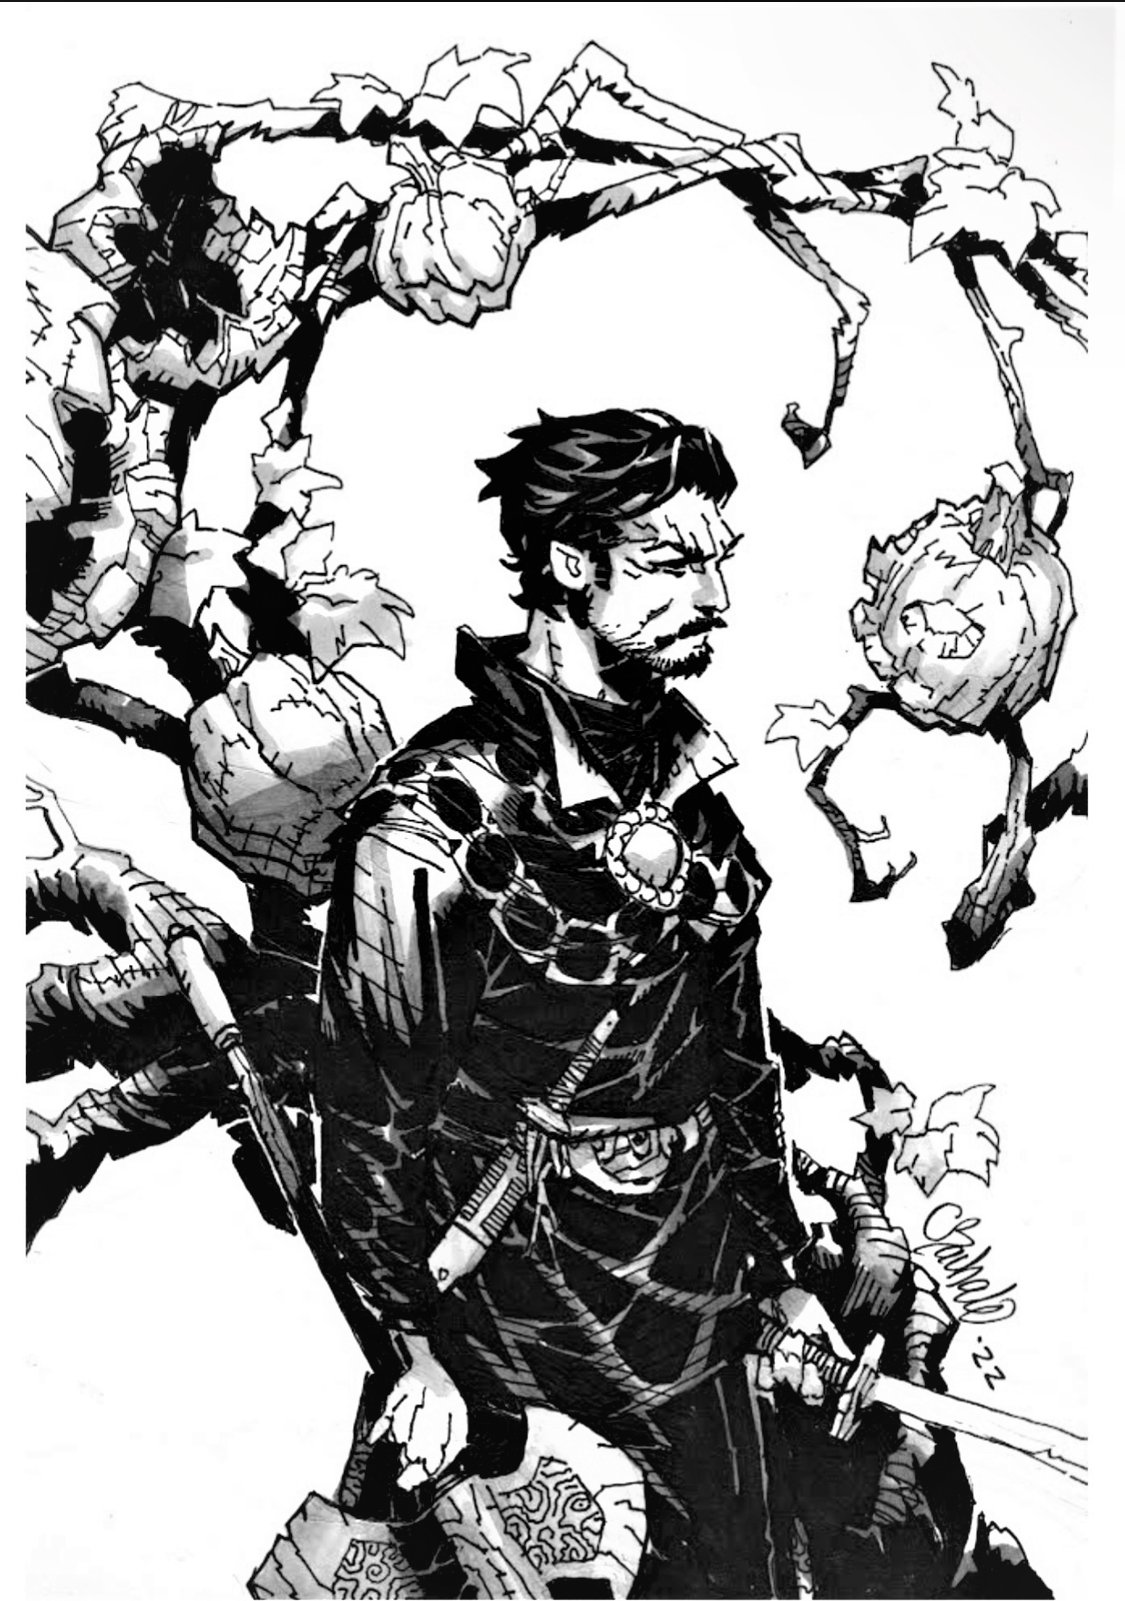 Doctor Strange #8 pg 10 by Chris Bachalo (ft Scarlet Witch), in K Gearon's  Published Art MARVEL - 2010 to 2019 Comic Art Gallery Room